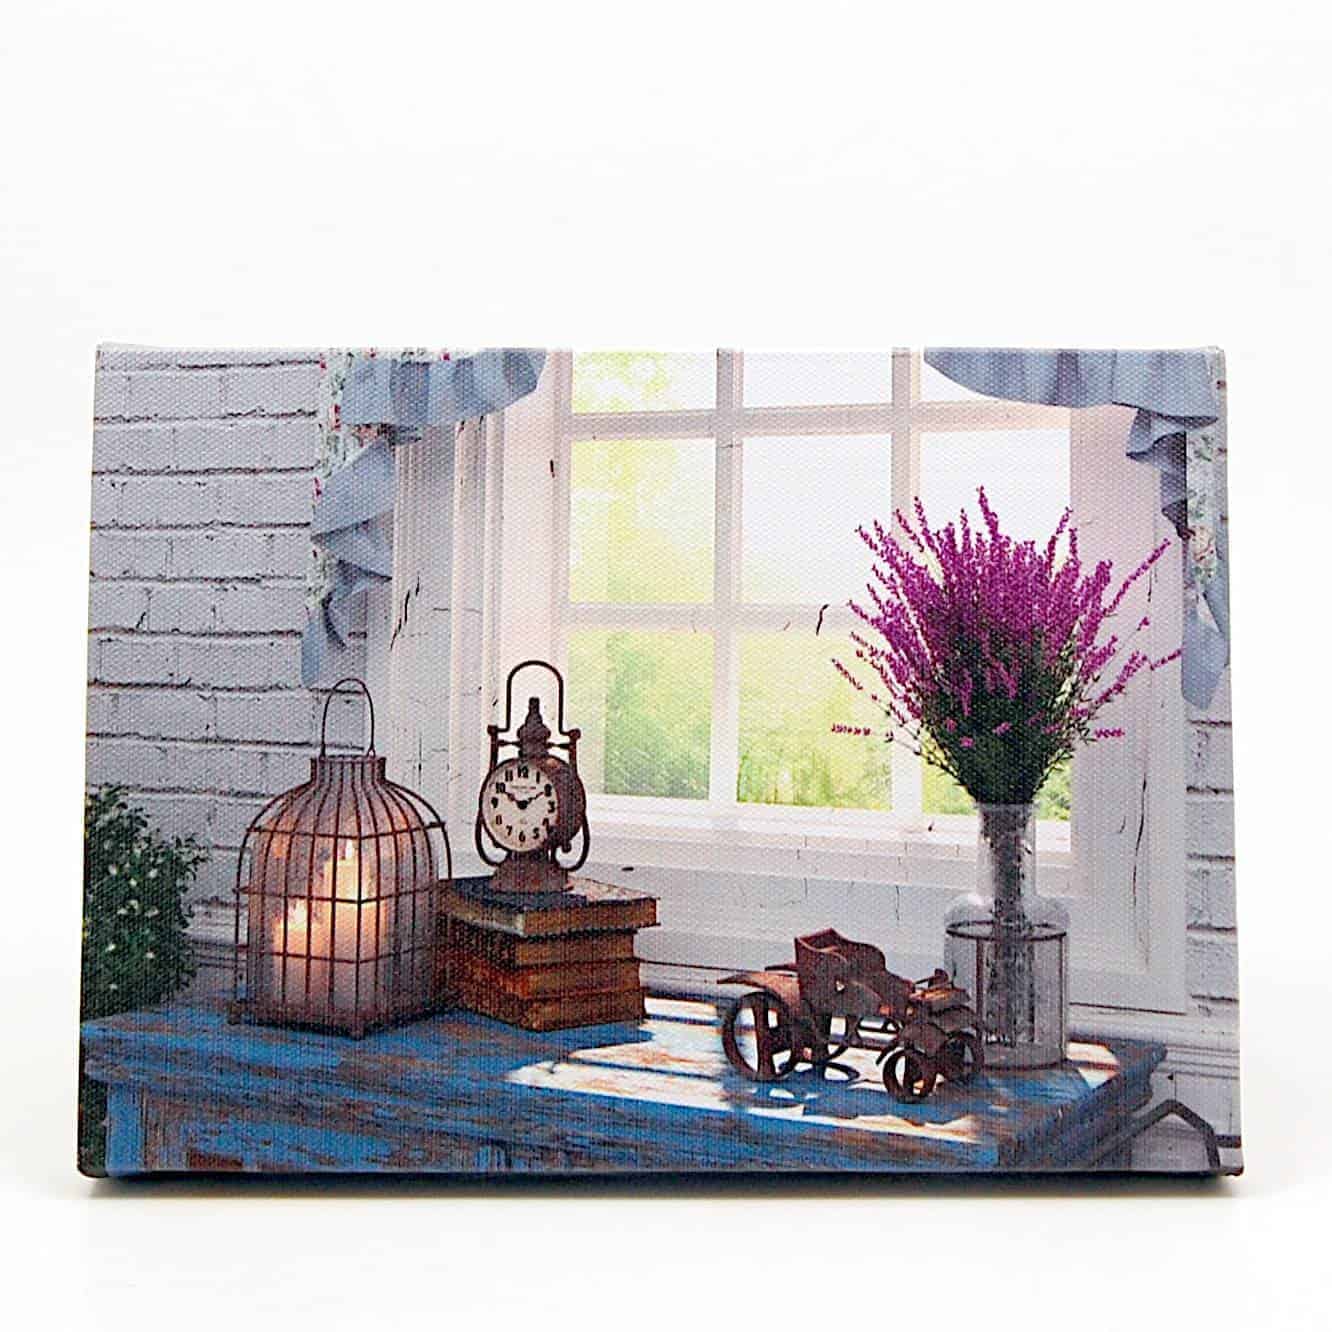 This Bird Cage and Clock LED Light Up Lighted Canvas Wall or Tabletop Picture Art is made with love by Premier Homegoods! Shop more unique gift ideas today with Spots Initiatives, the best way to support creators.